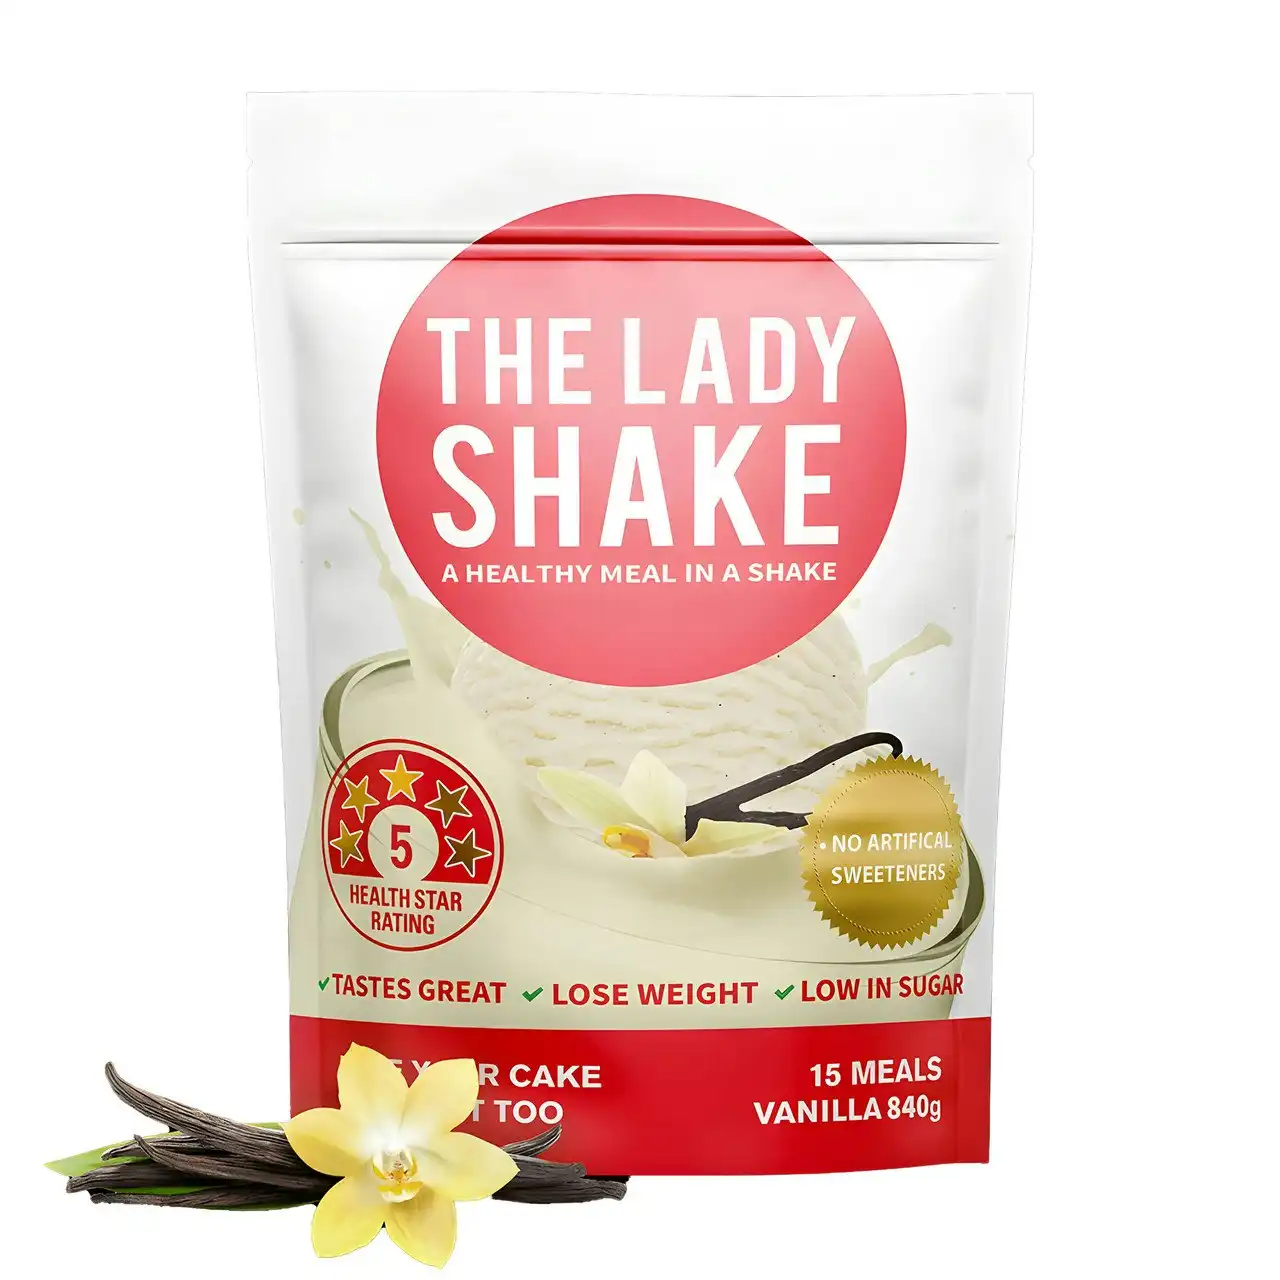 The Lady Shake Meal Replacement Vanilla 840g